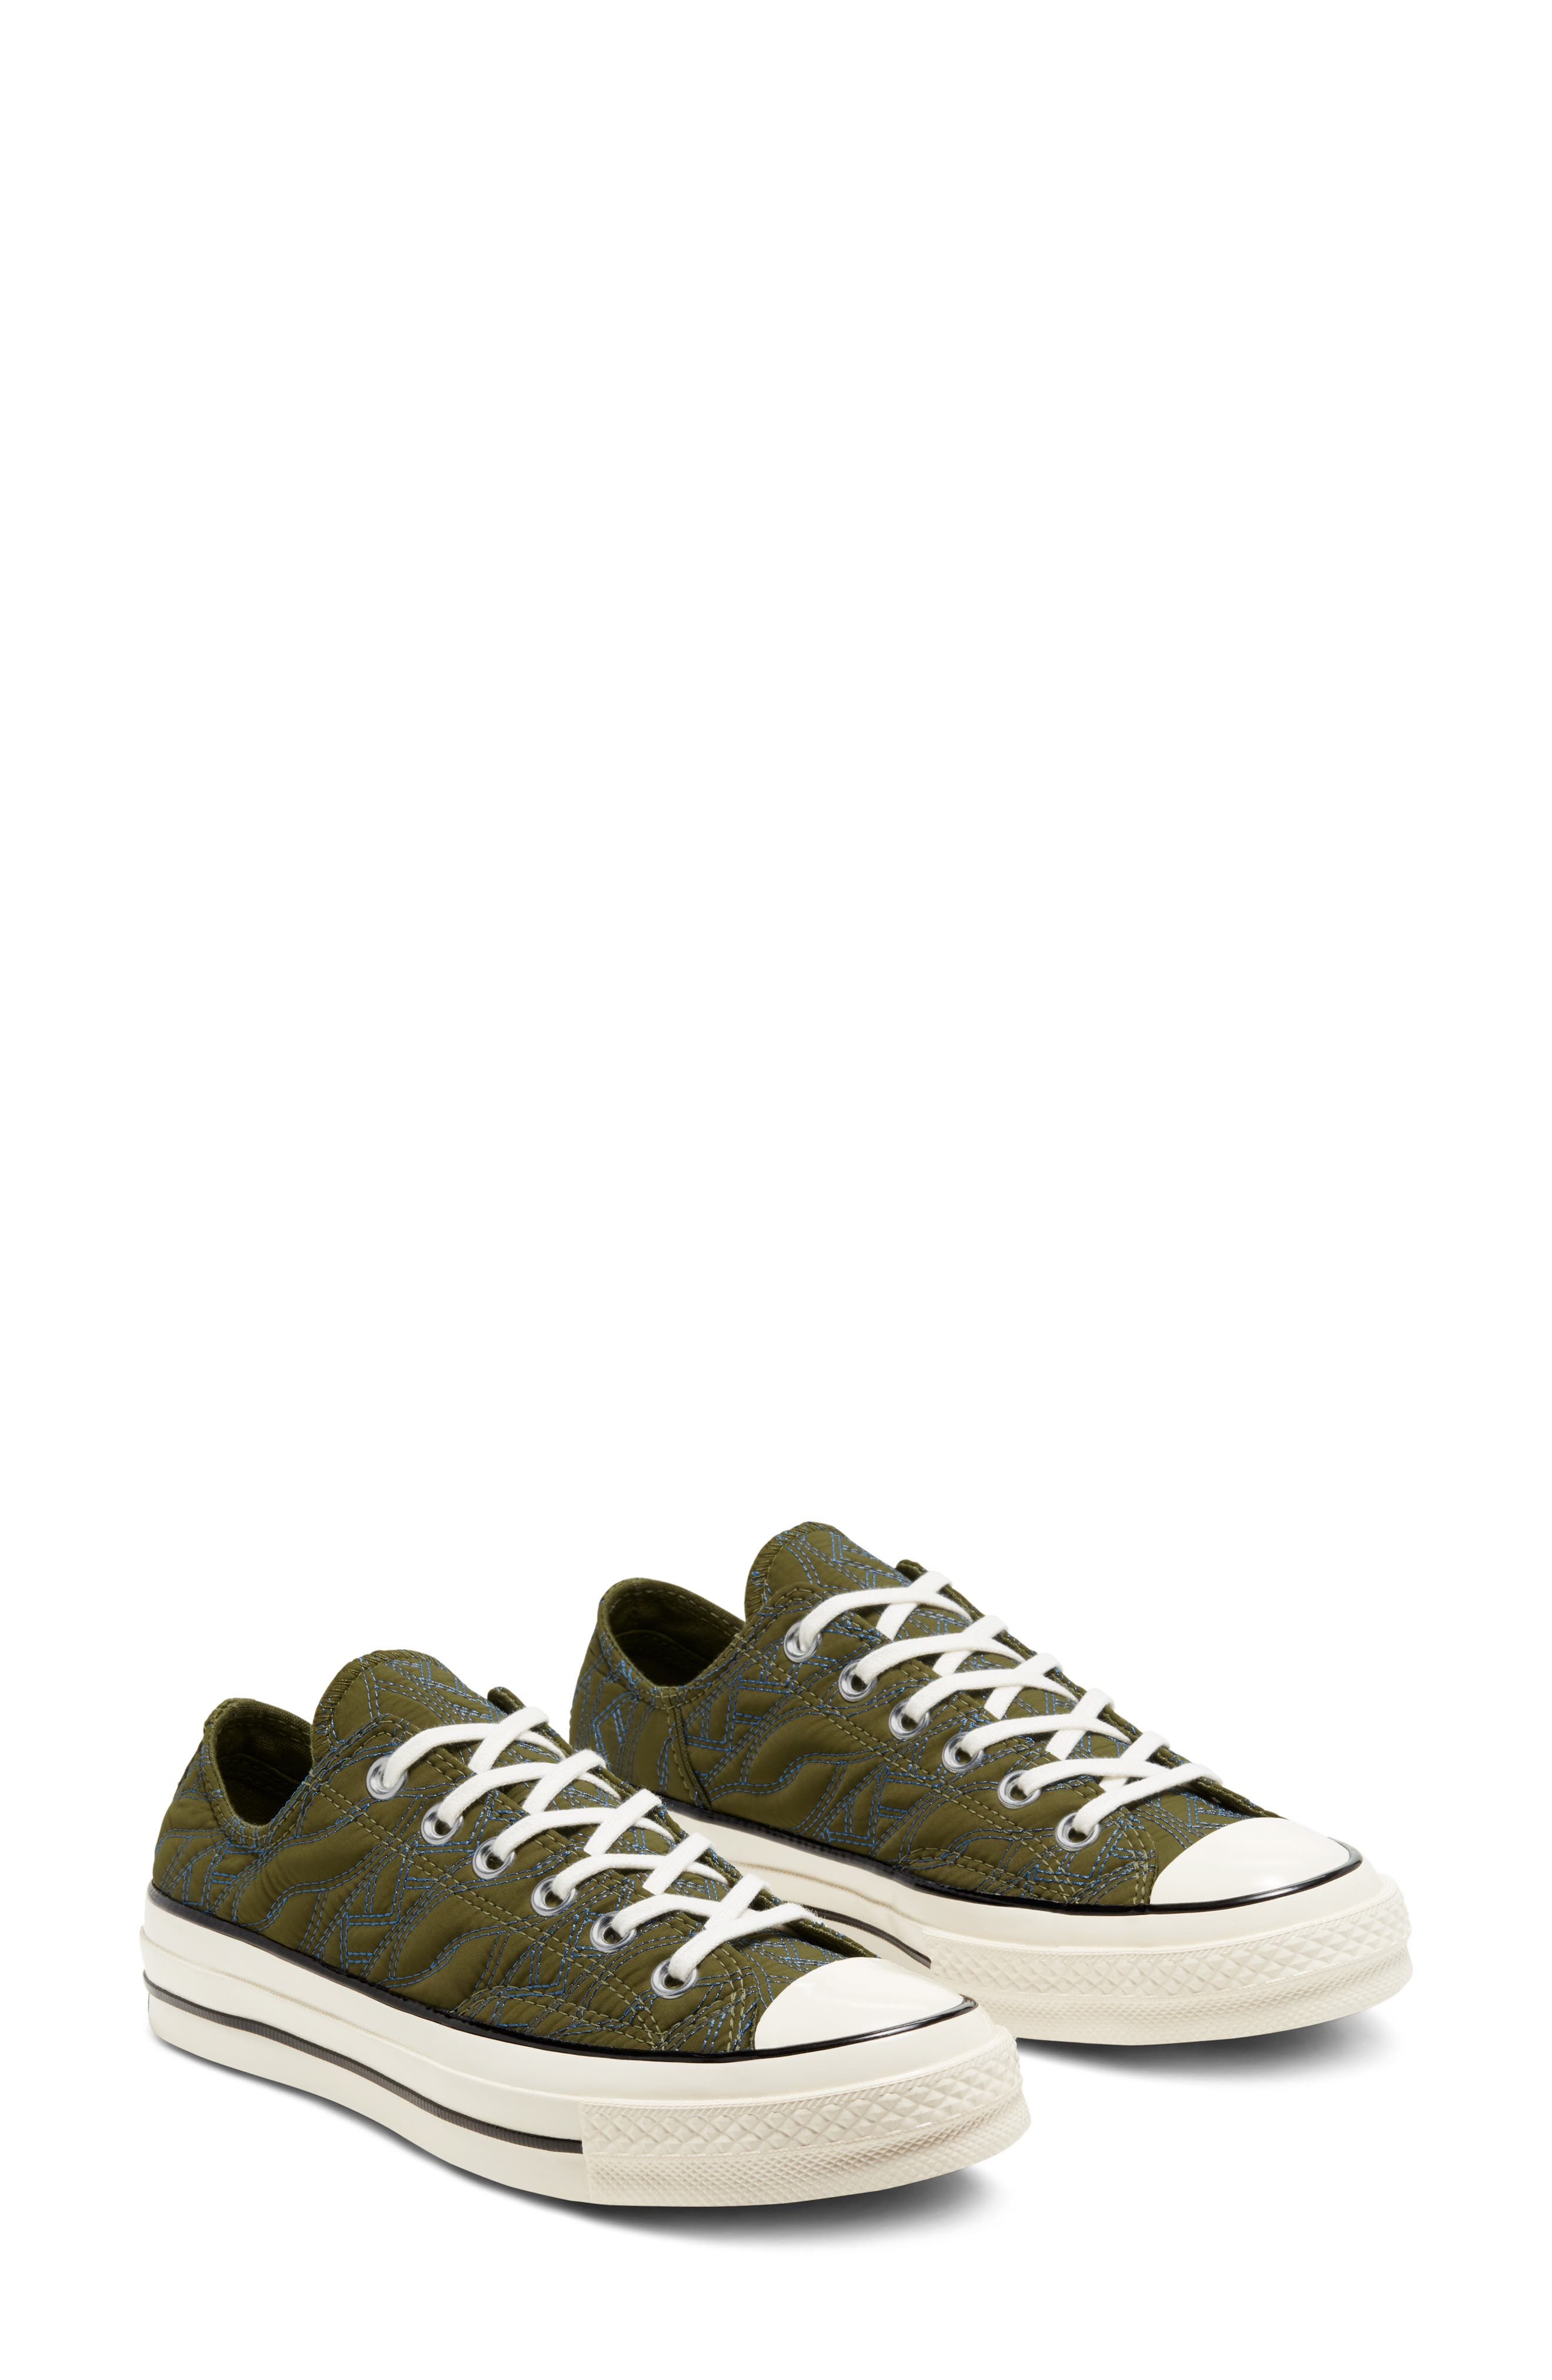 ConverseWomen's Converse Chuck Taylor All Star Quilted Sneaker, Size 7 M -  Green | DailyMail